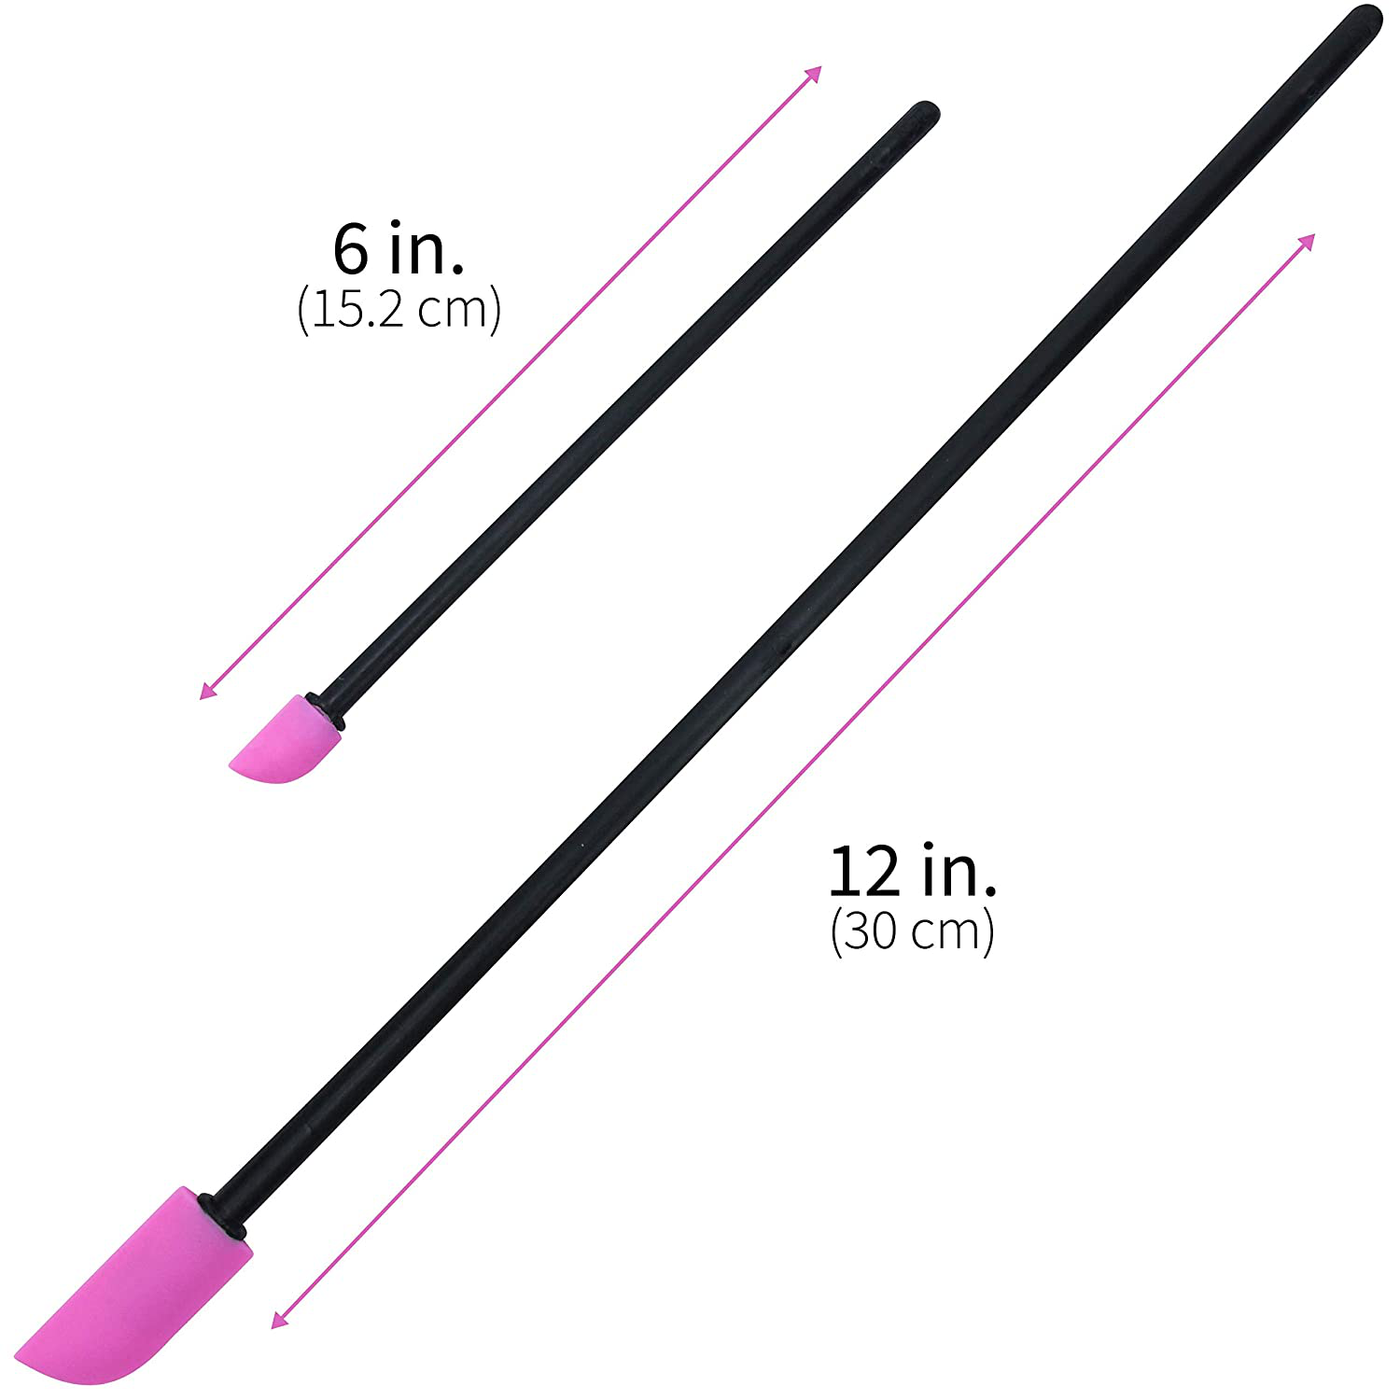 S&T INC. Beauty Spatulas, 2 Piece Set, Large and Small Sizes for Beauty and Kitchen, Black/Pink